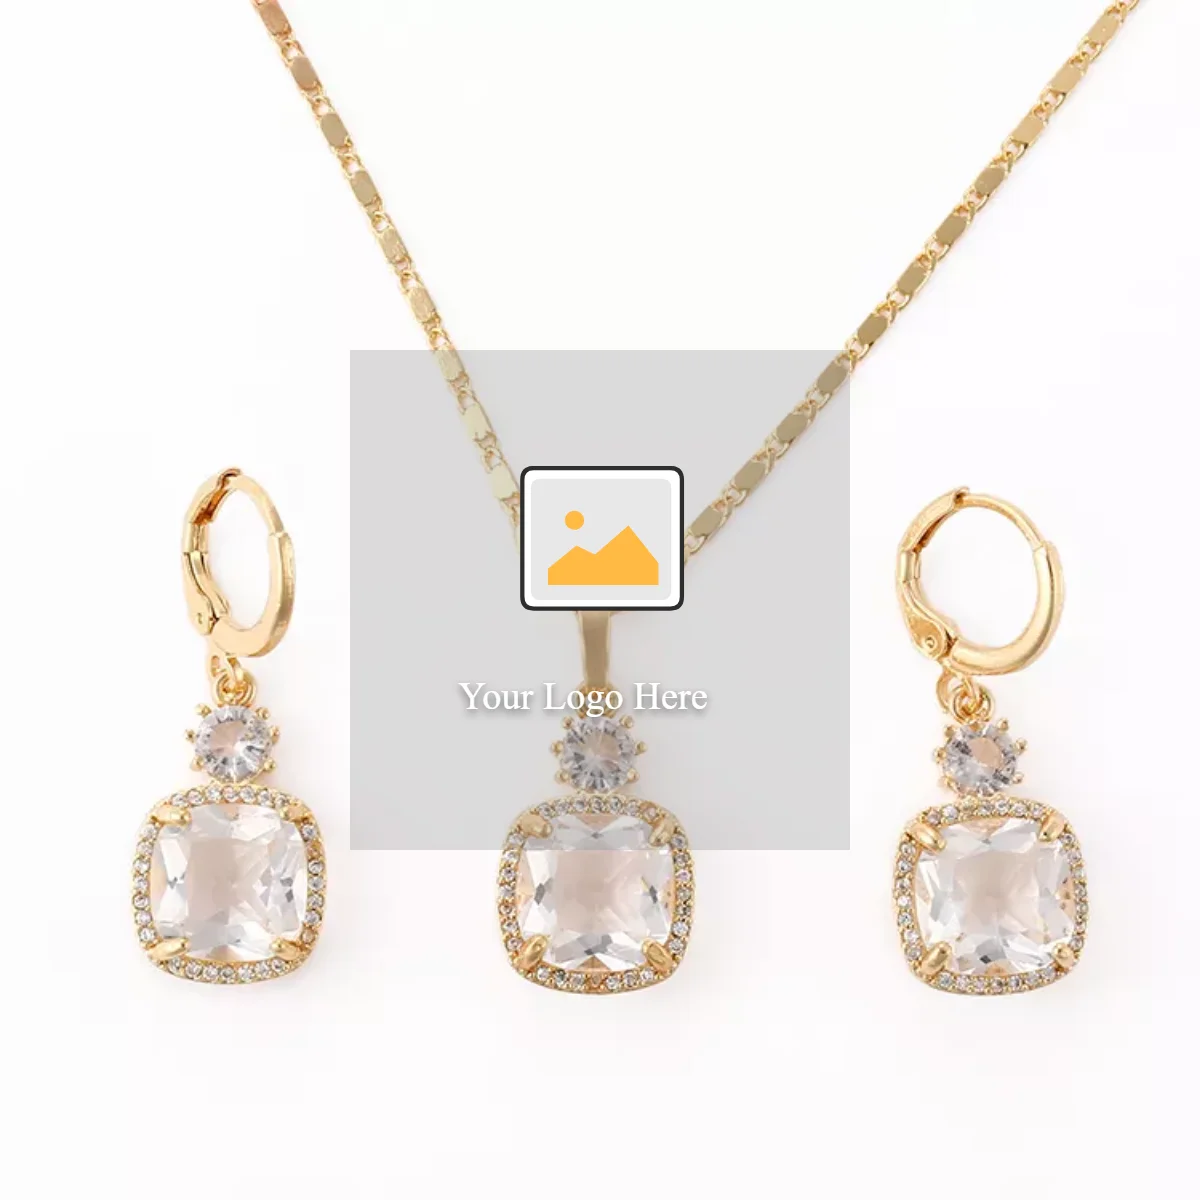 Yellow Gold Plated Clear Zircon Pendant Necklace Stud Earring Bridal Jewelry Set 